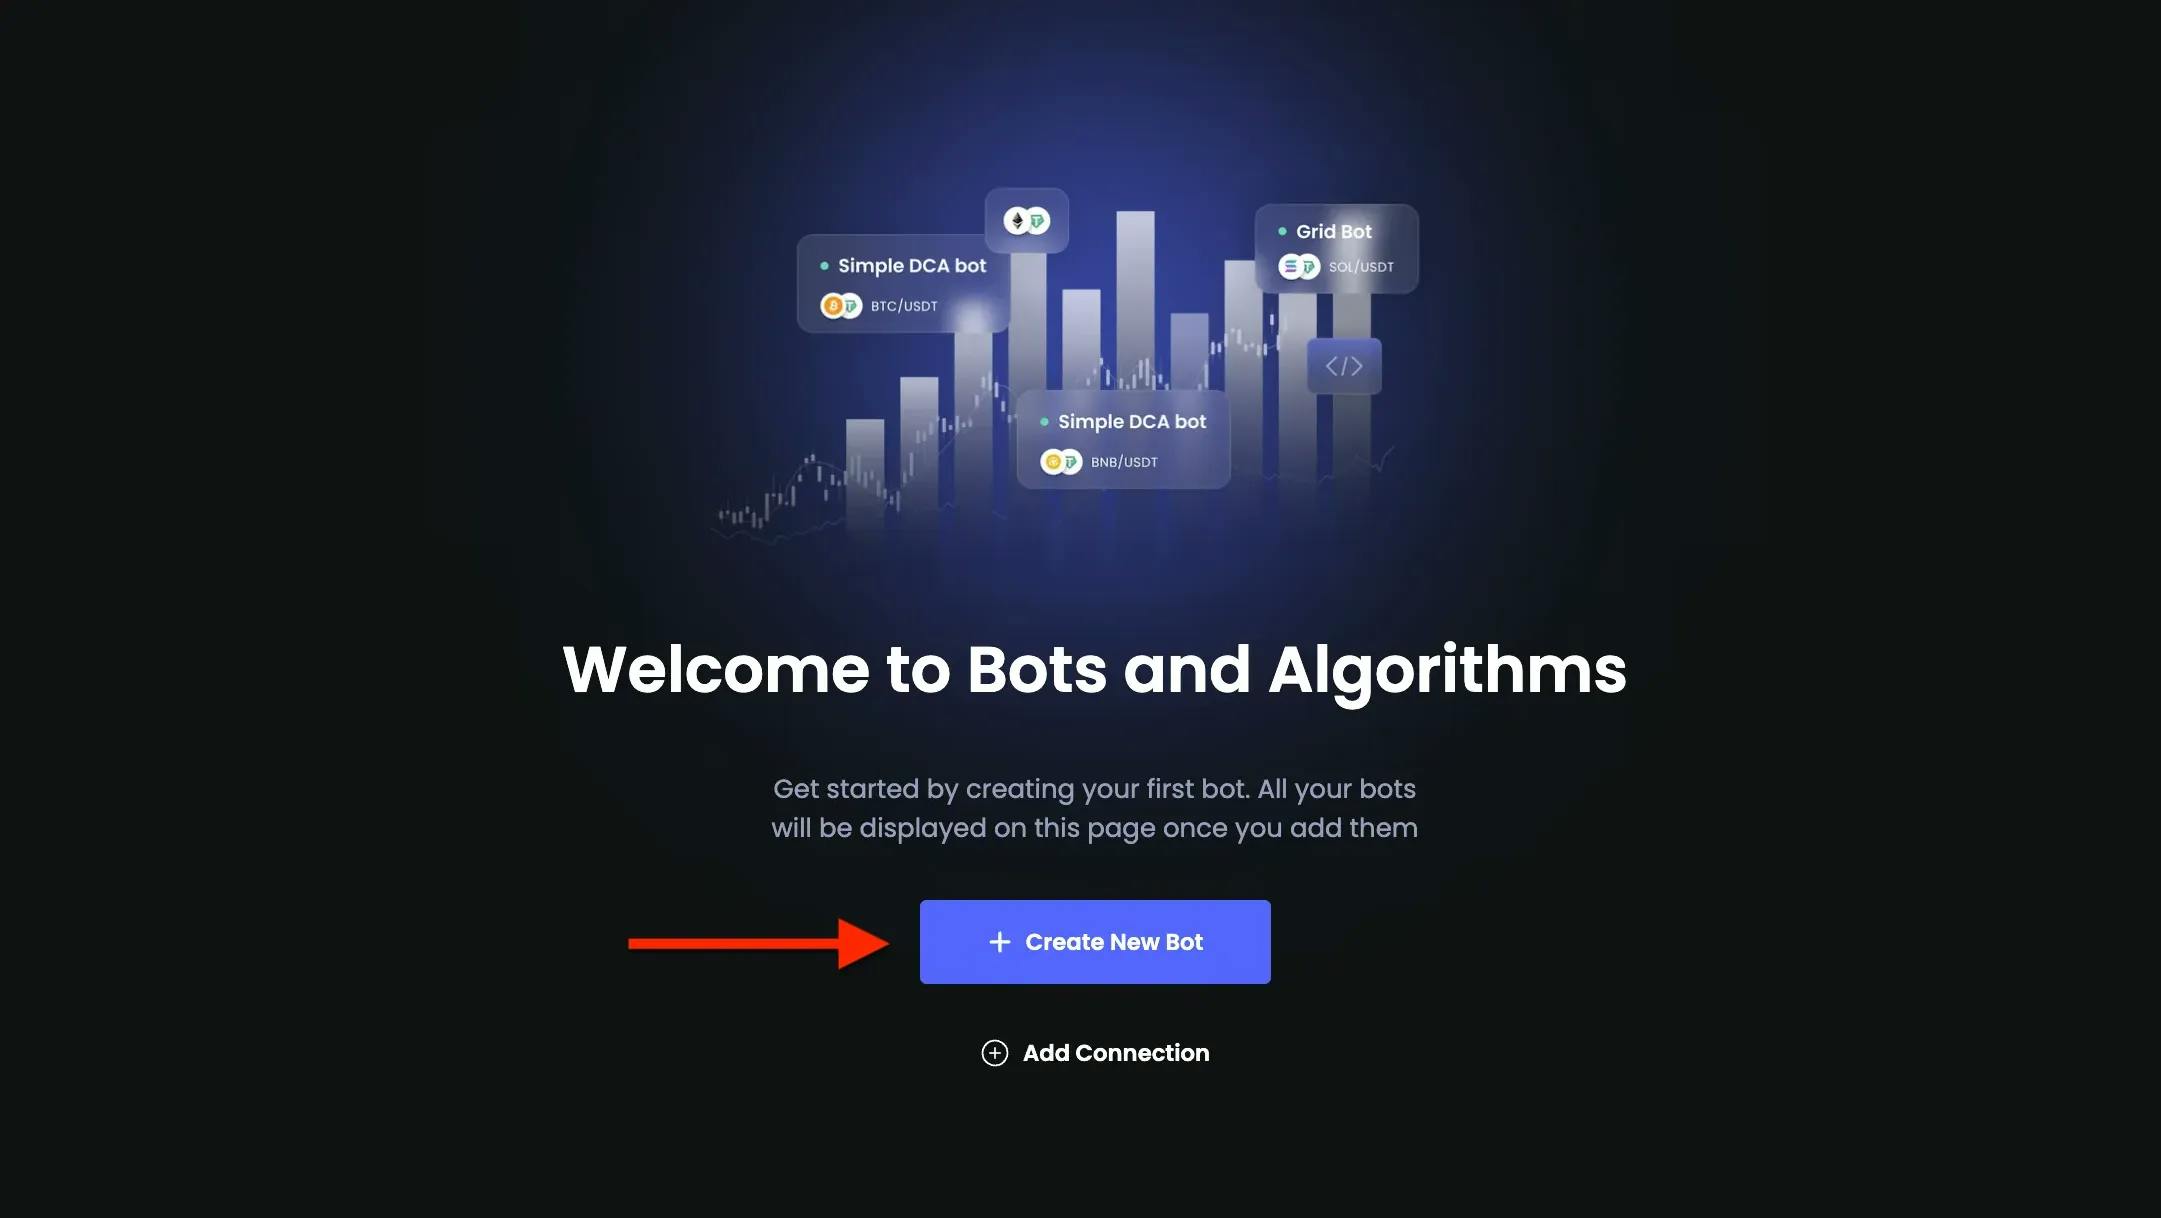 How to Set Up Your First Grid Bot